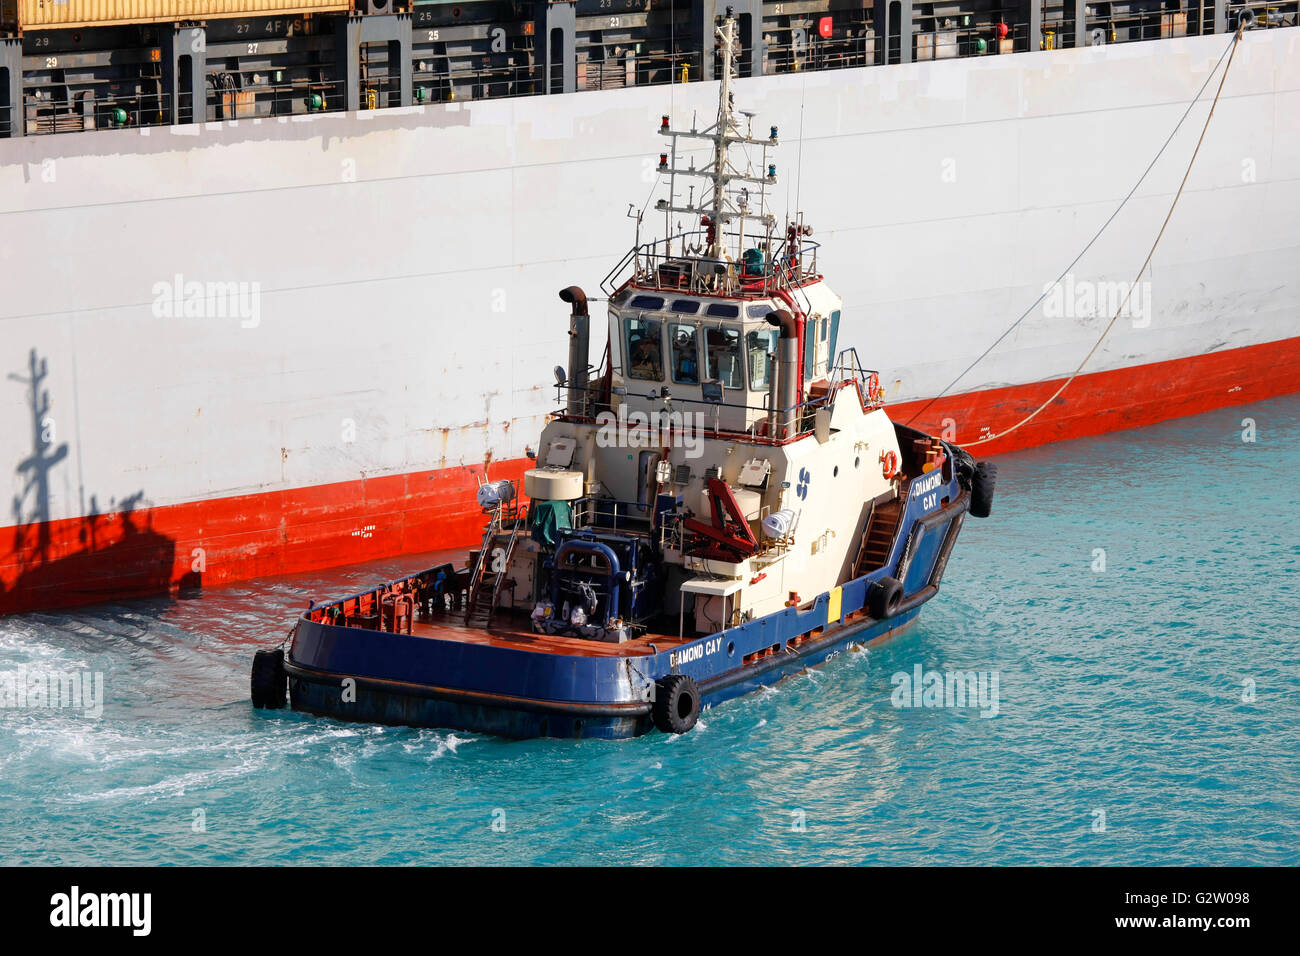 Tugboat pushing cargo ship in the port Stock Photo